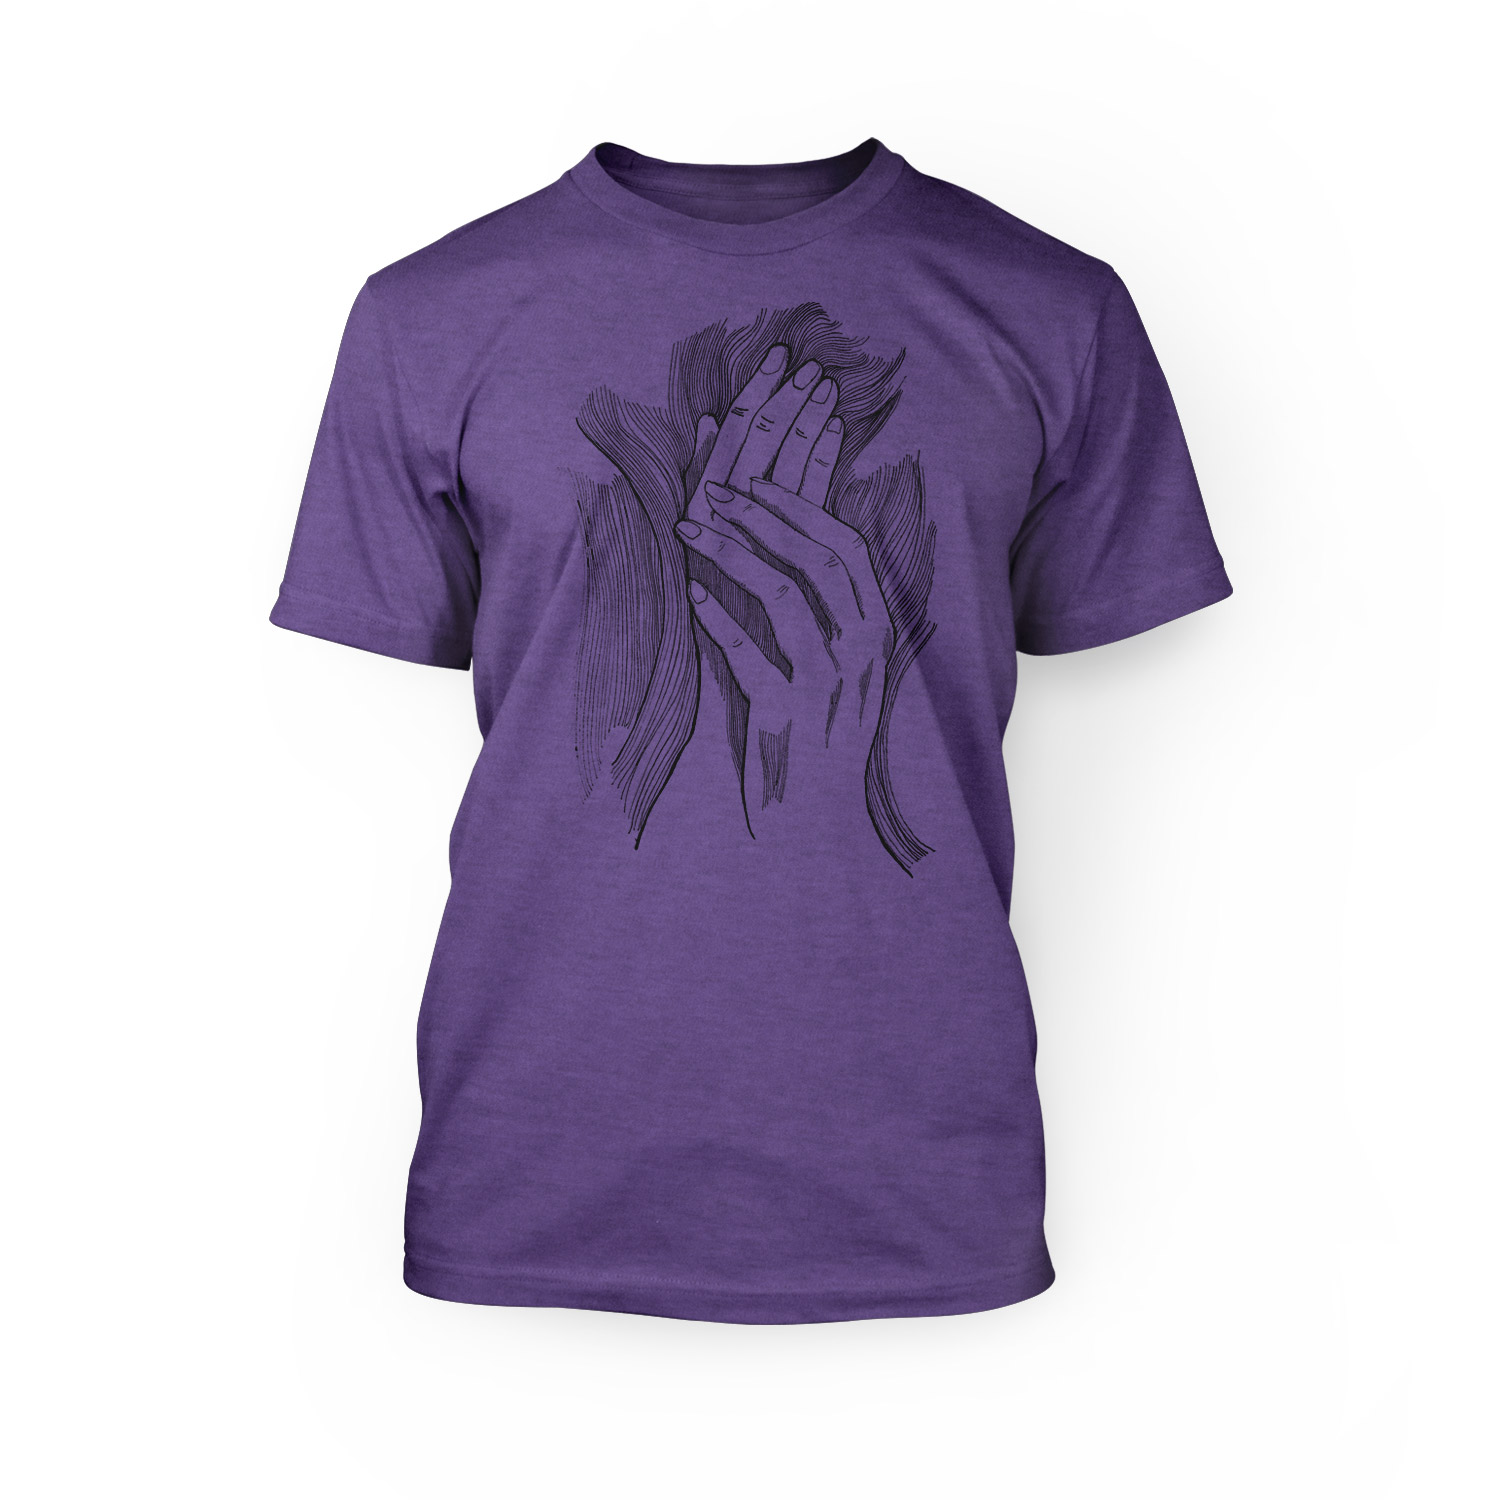 "handmade graphic of hands touching each other on the front of a heather team purple crew neck unisex t-shirt"